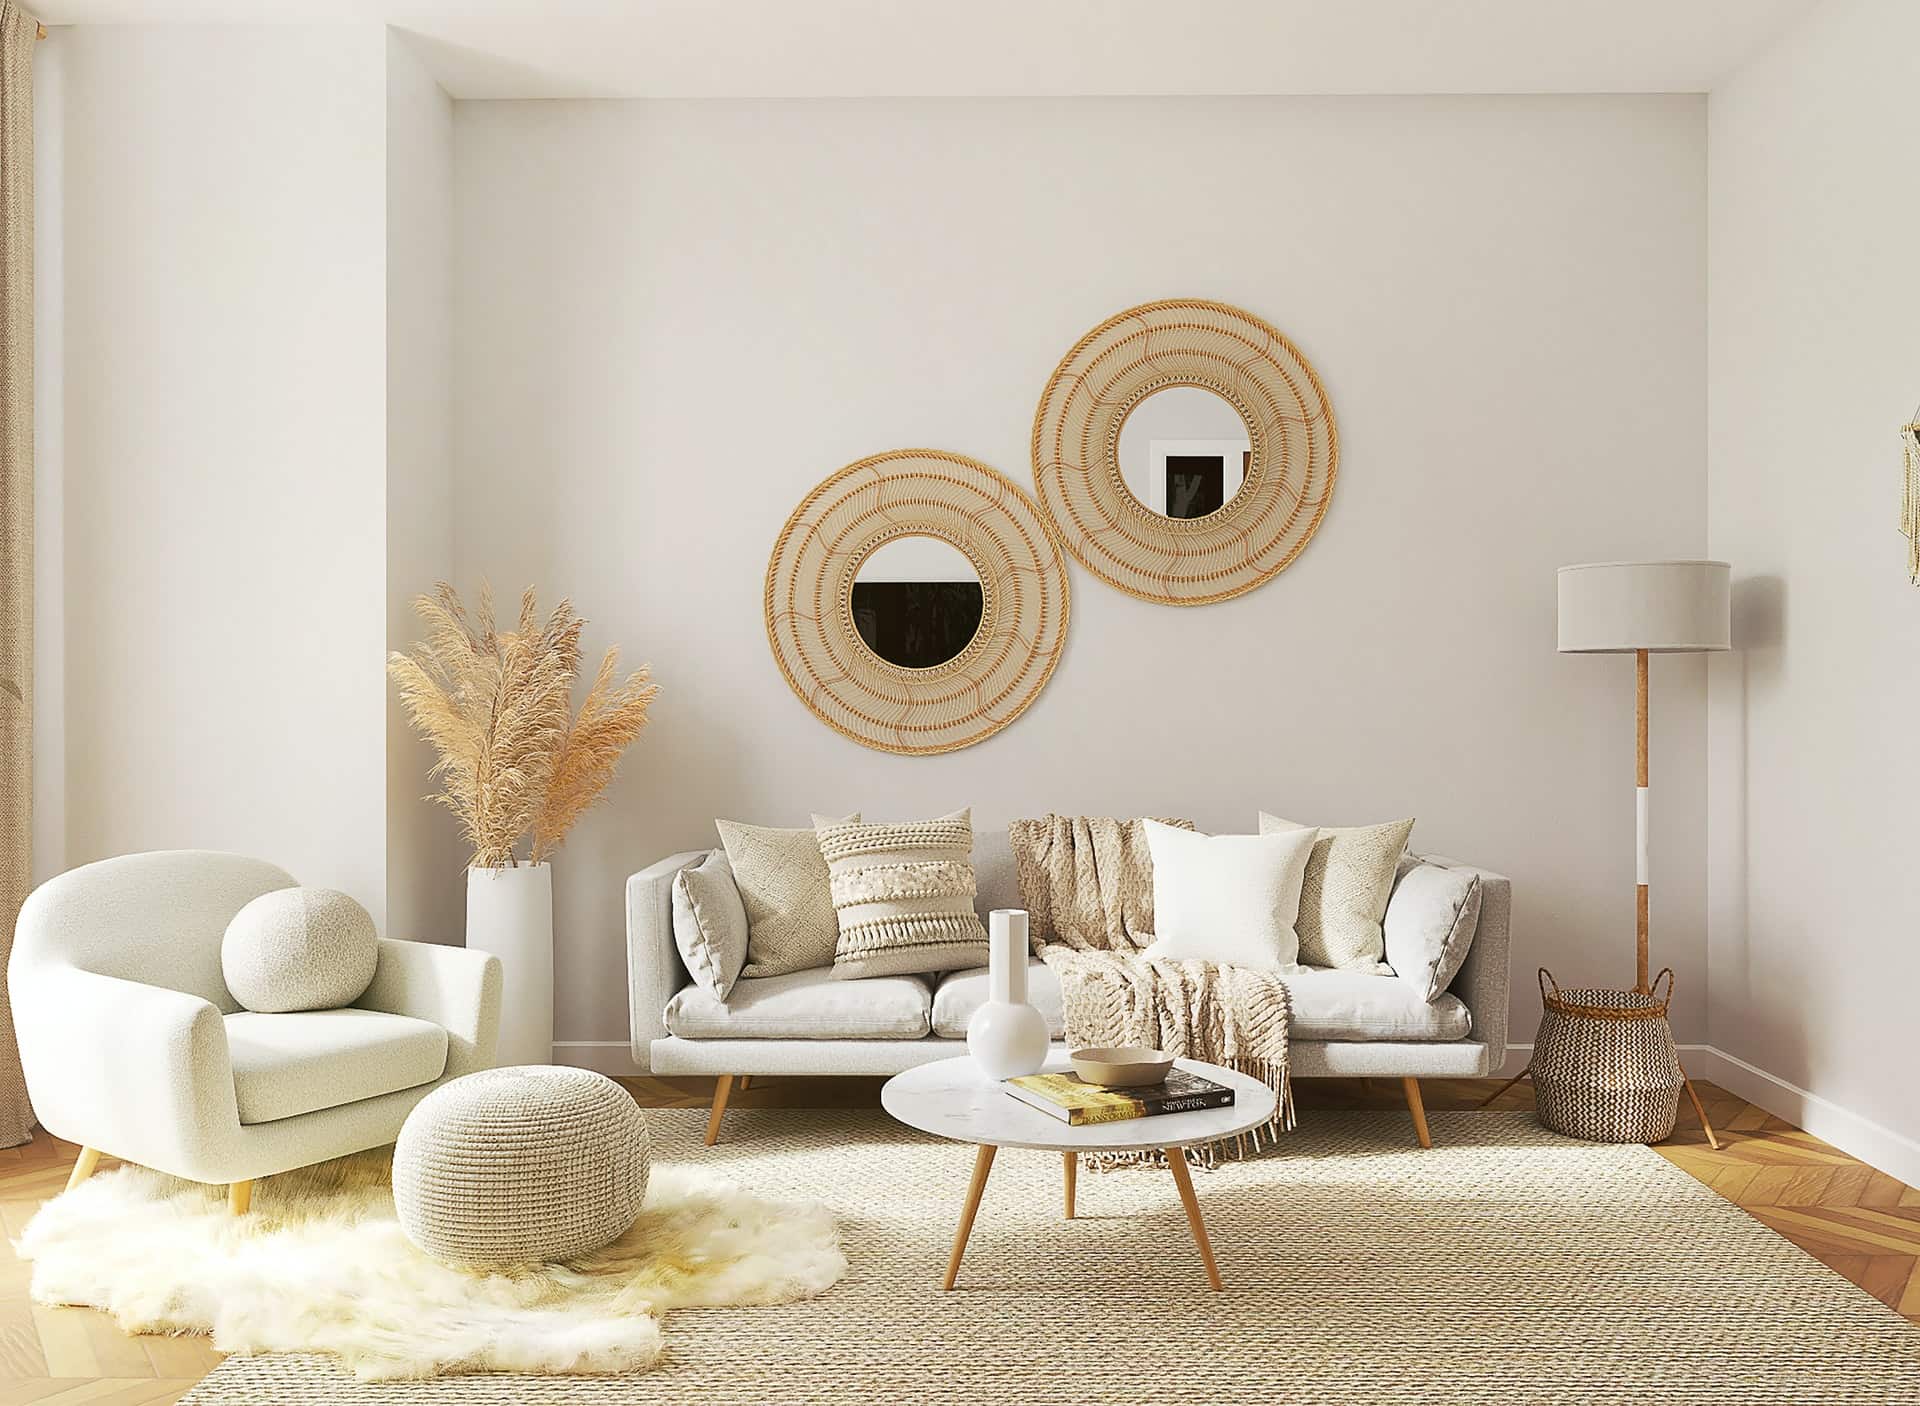 Small and Simple Decorating Details That are Perfect For Your Living Room. White and pastel decorated interior with curve soft furniture and fluffy rug and carpeting